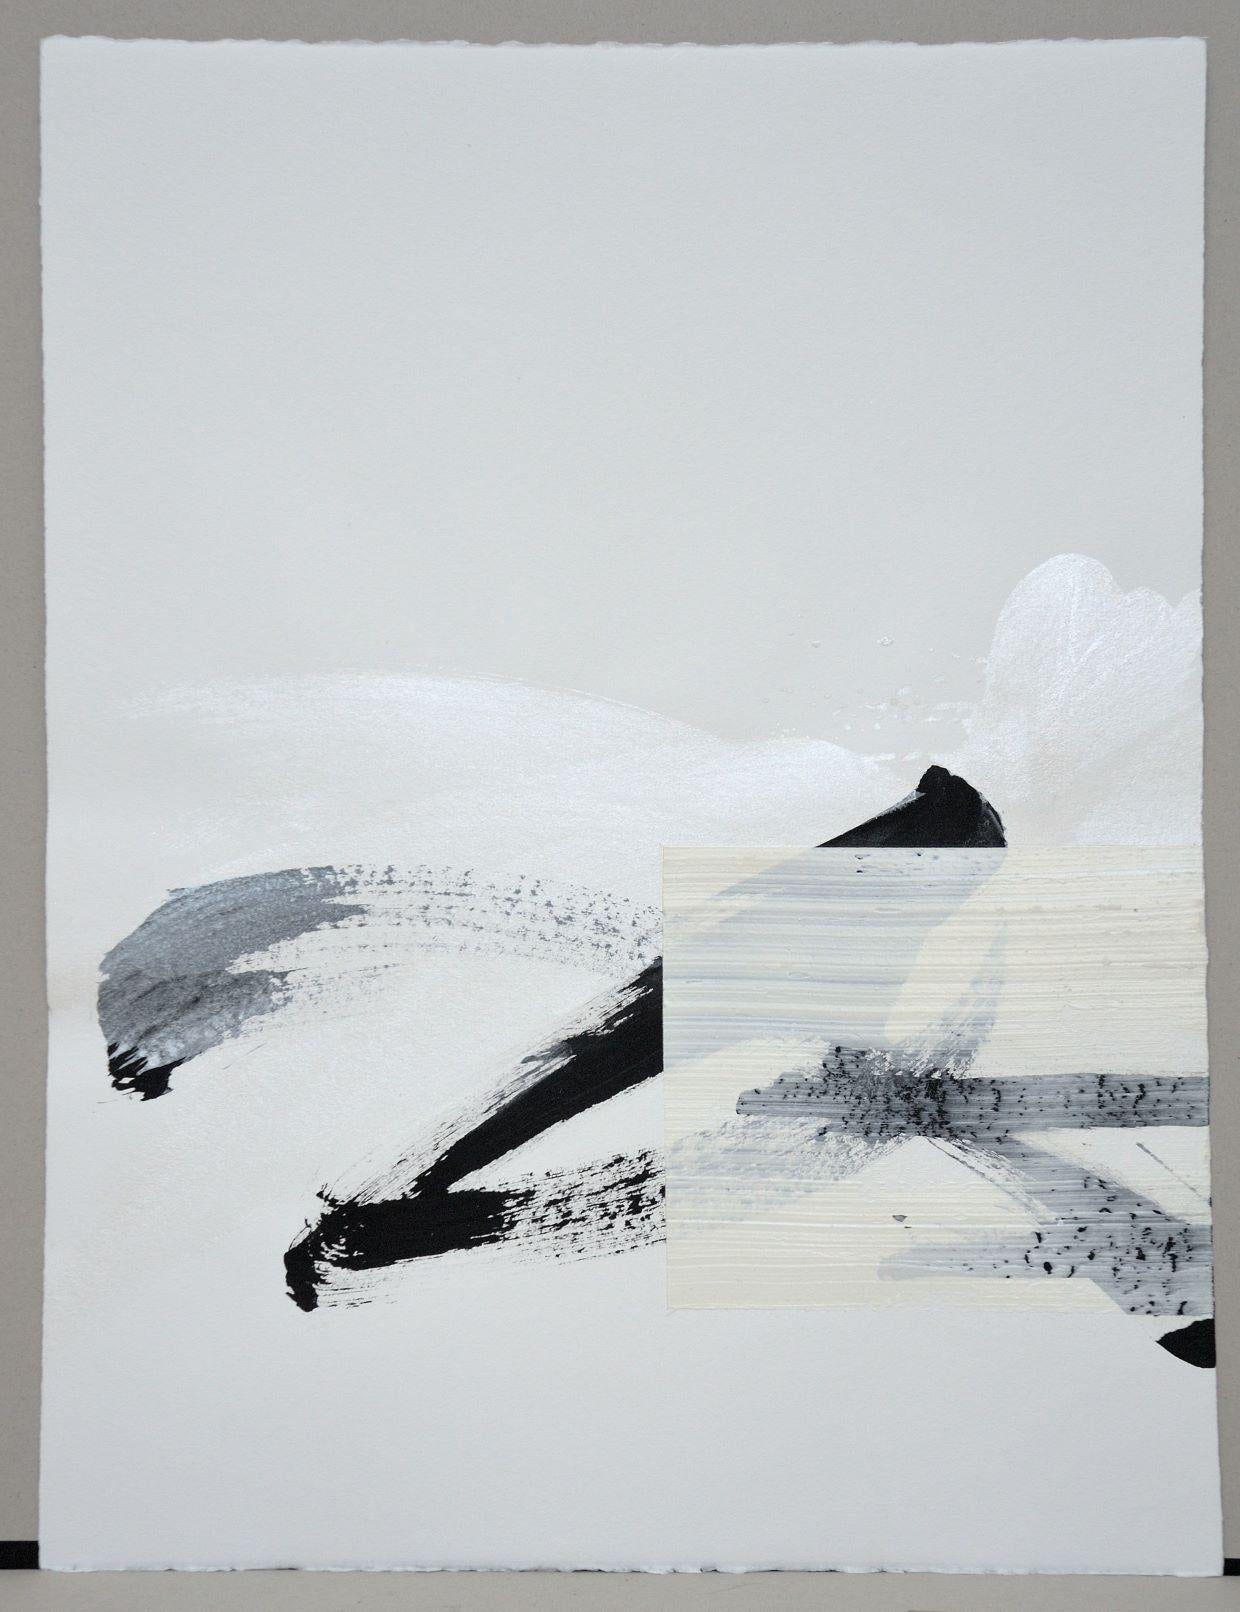 Permanescence N553-D - Calligraphy-based abstract work on paper - Painting by Hachiro Kanno